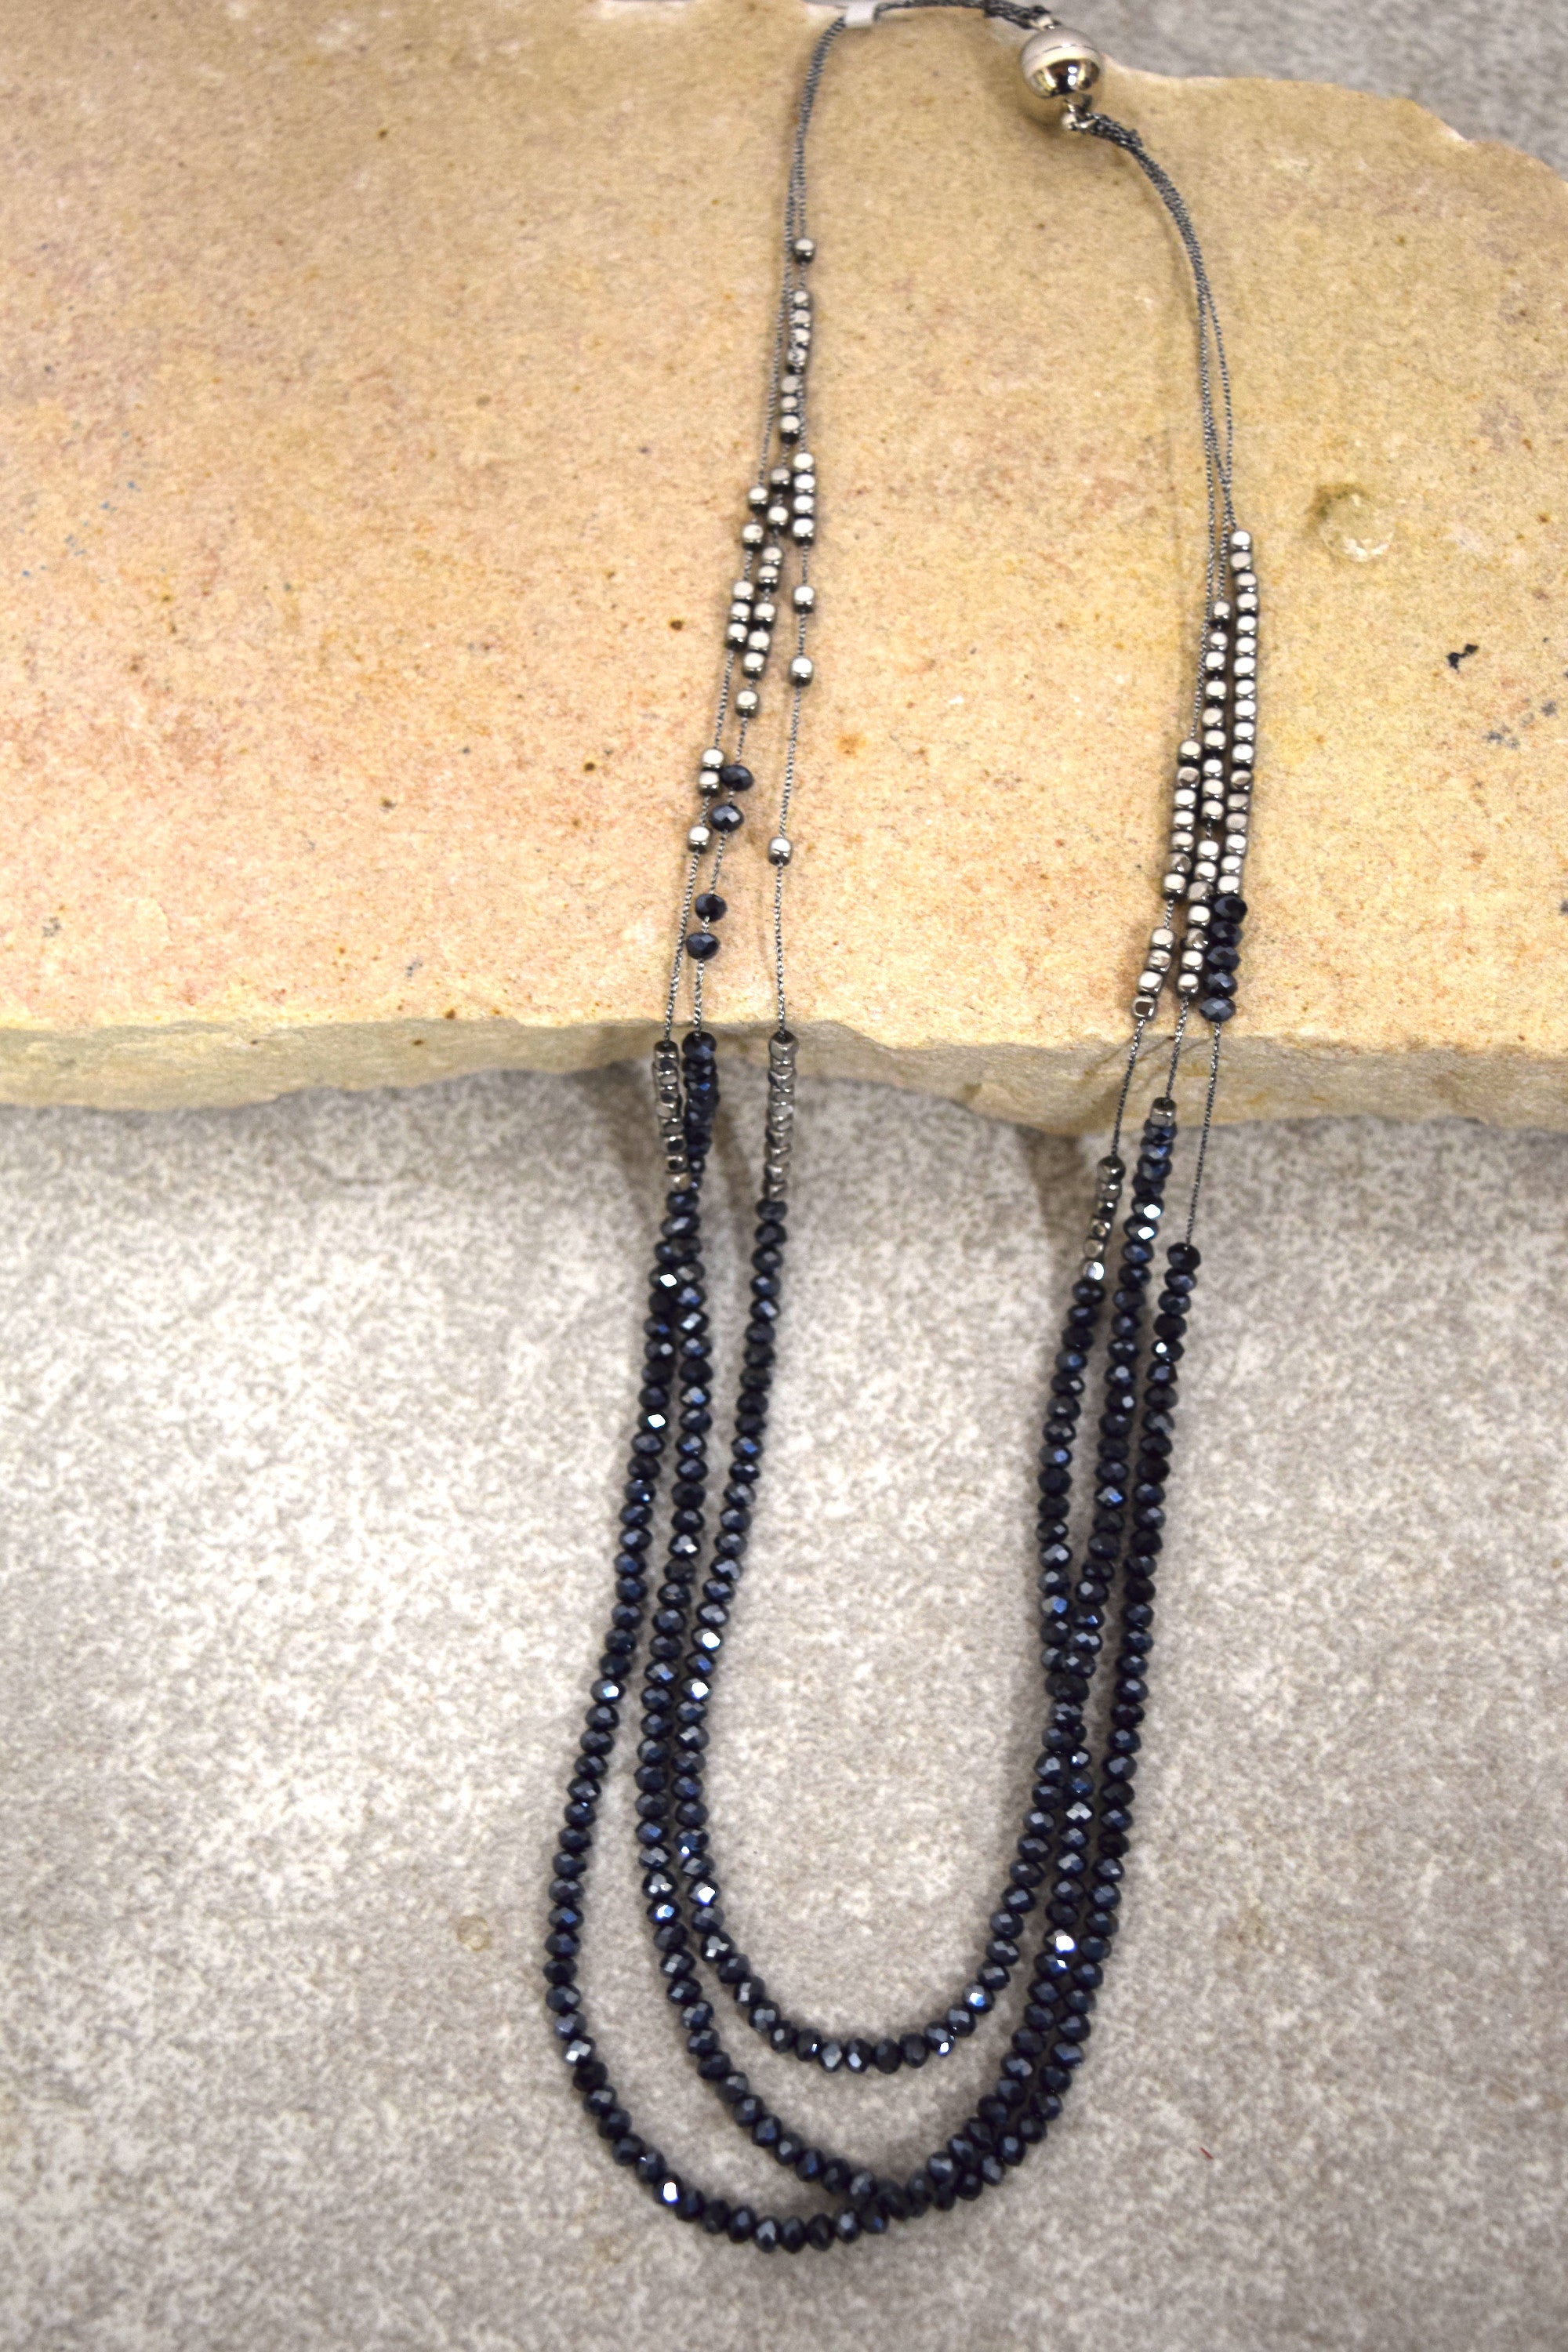 Glitter Necklace - Black and Silver